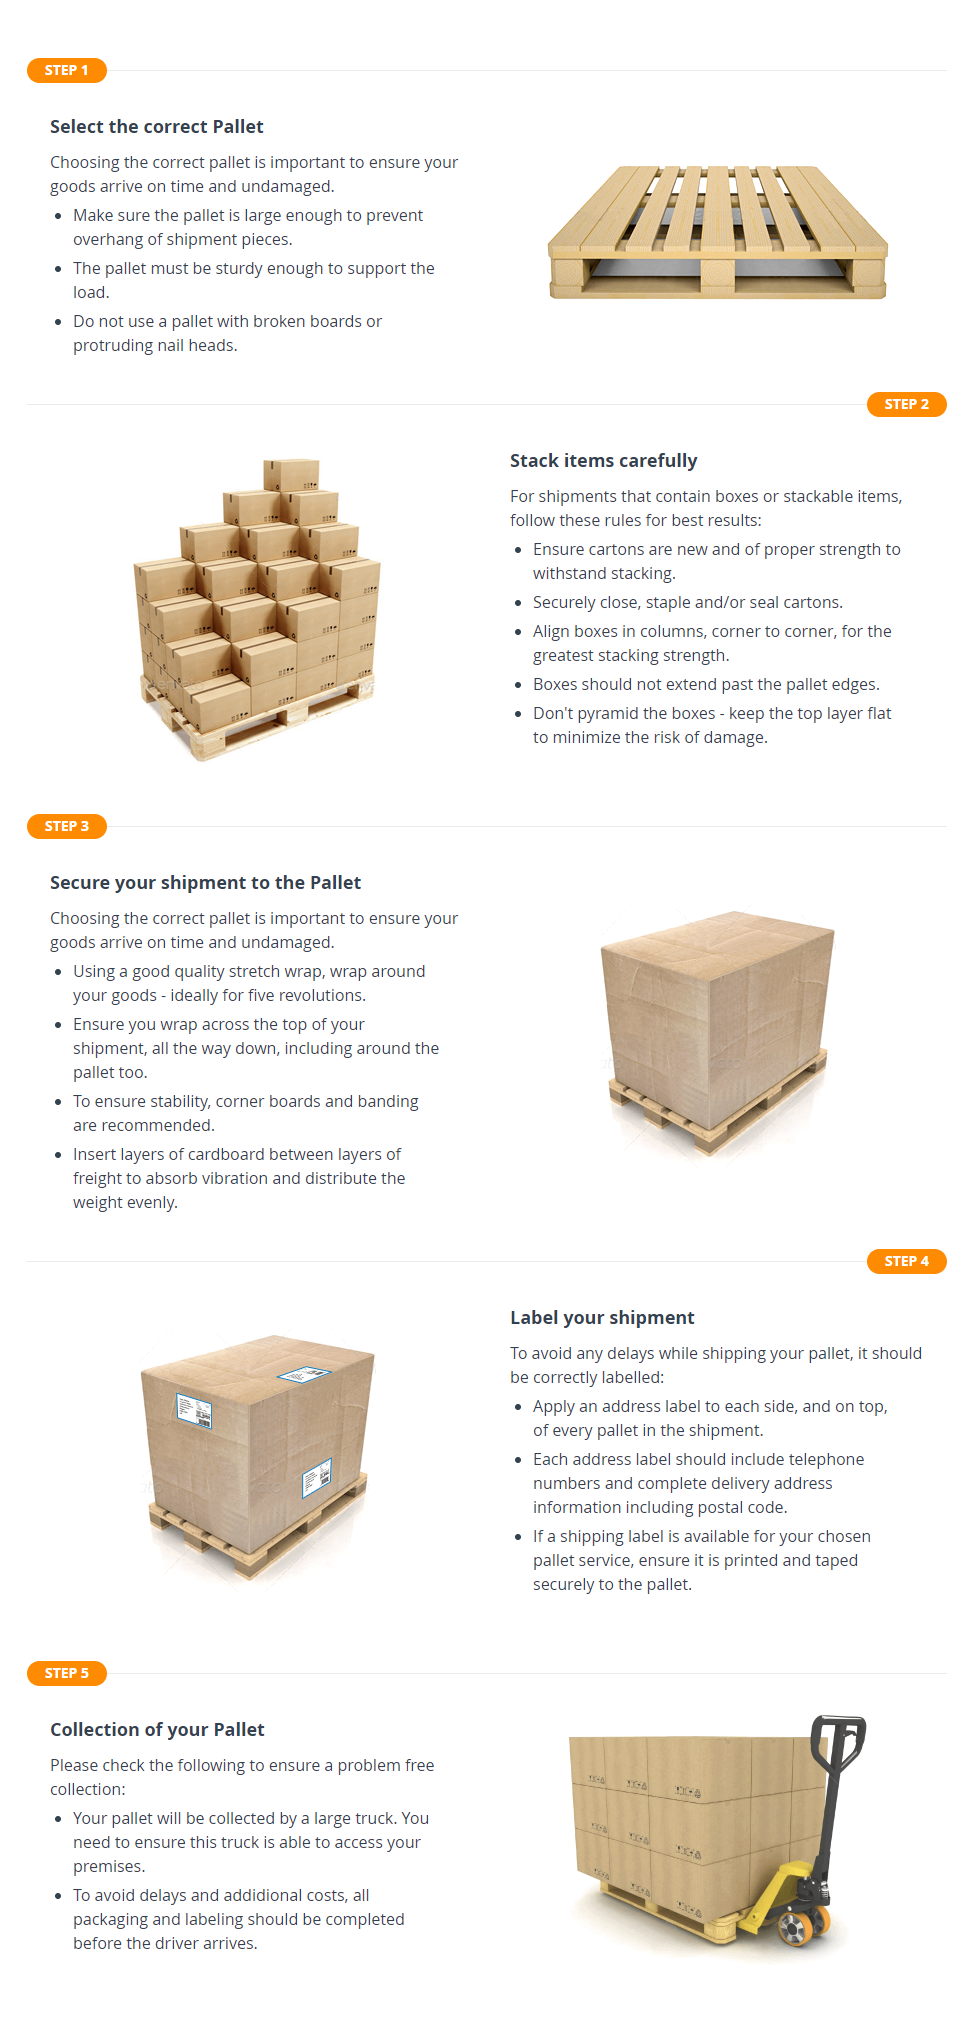 Packaging Supplies: Safely Ship Every Item Every Time